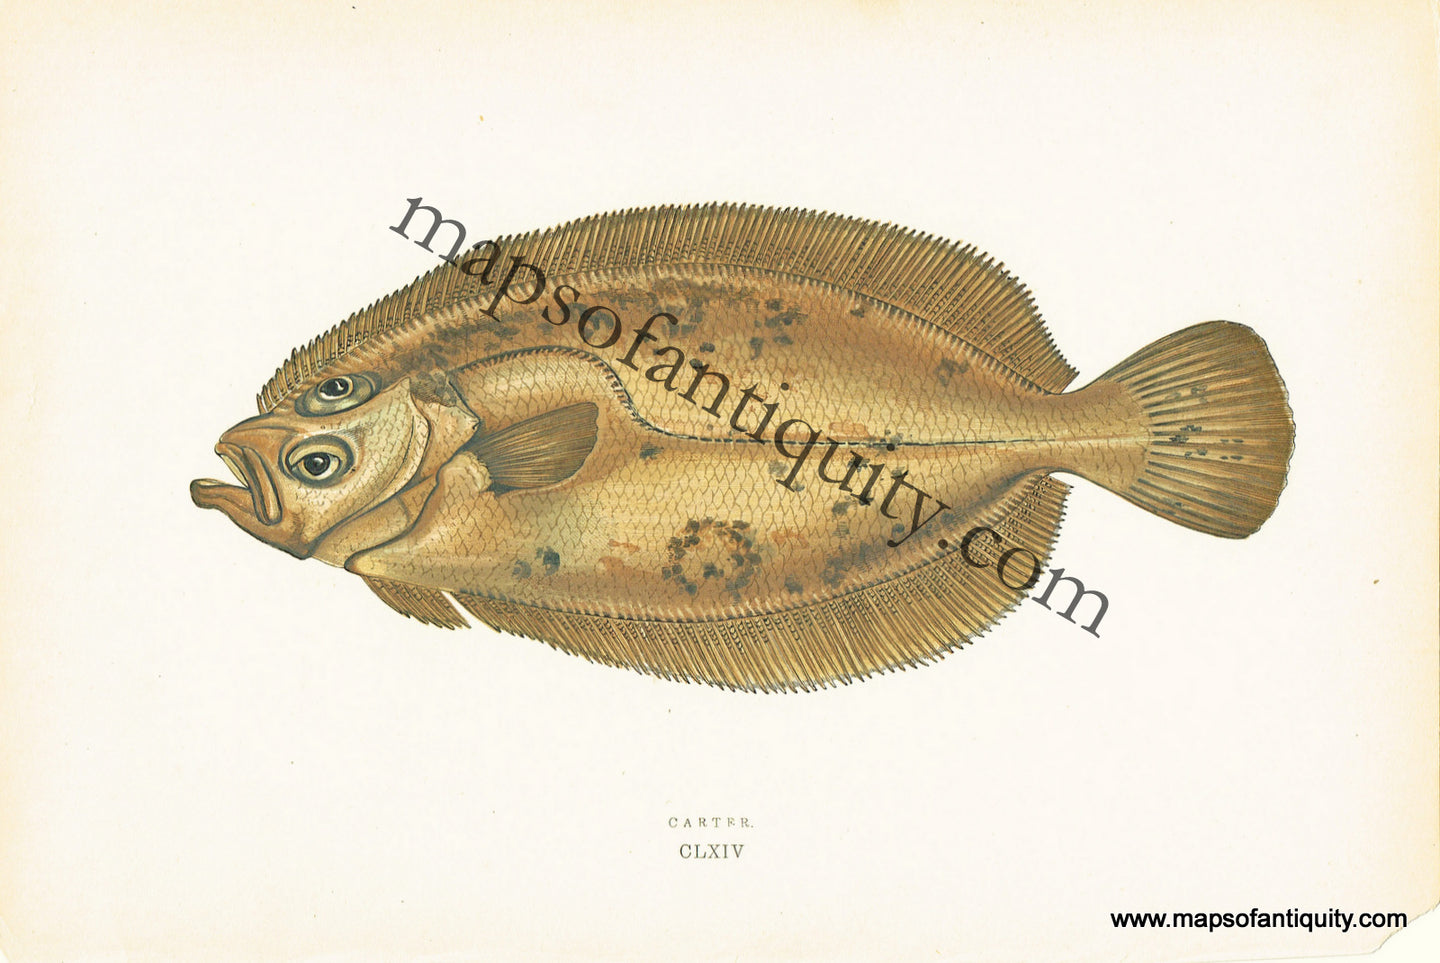 Antique-Colored-Litho-Print-Carter-CLXIV-Natural-History-Prints-Fish-1877-Couch-Maps-Of-Antiquity